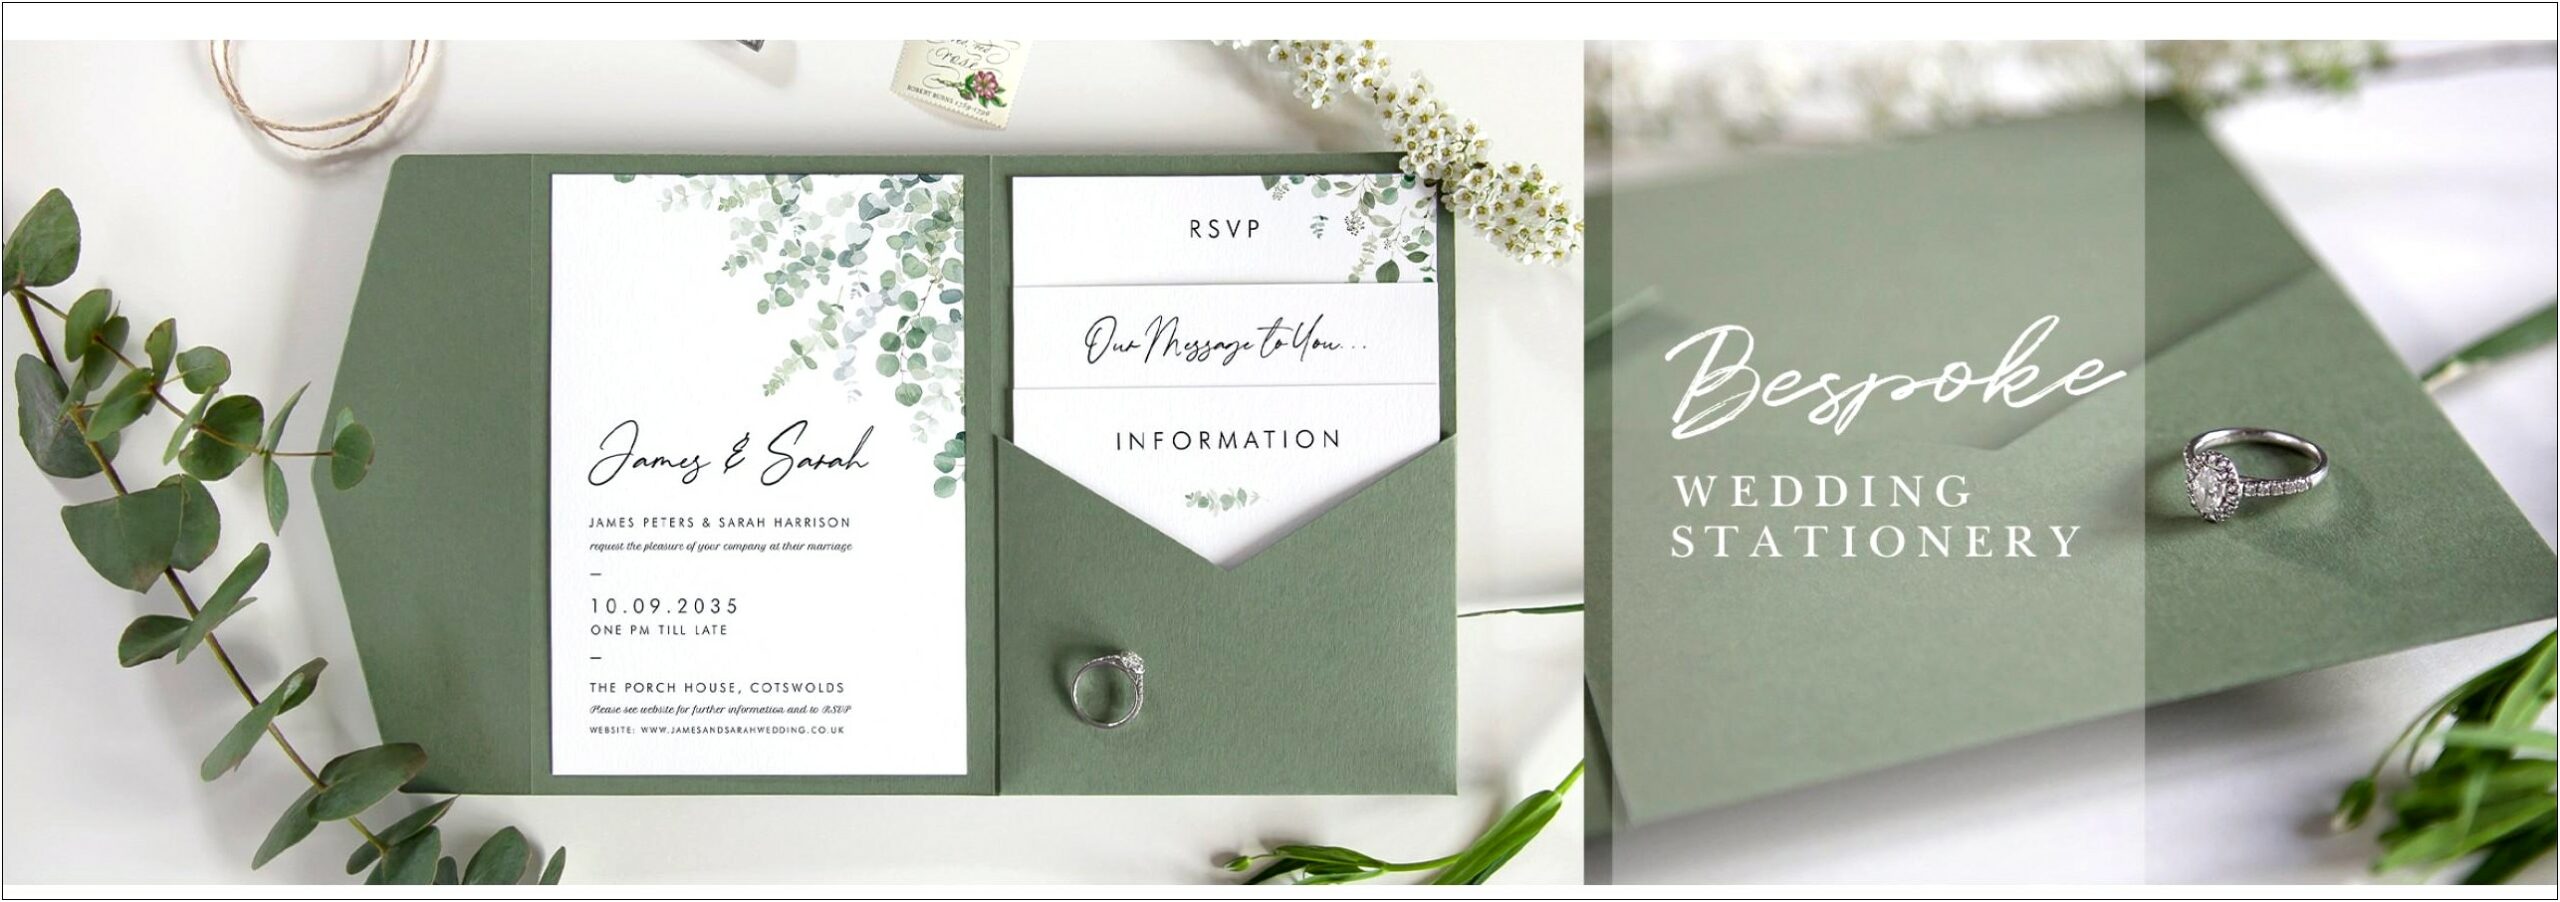 List Of Places To Send Wedding Invitations